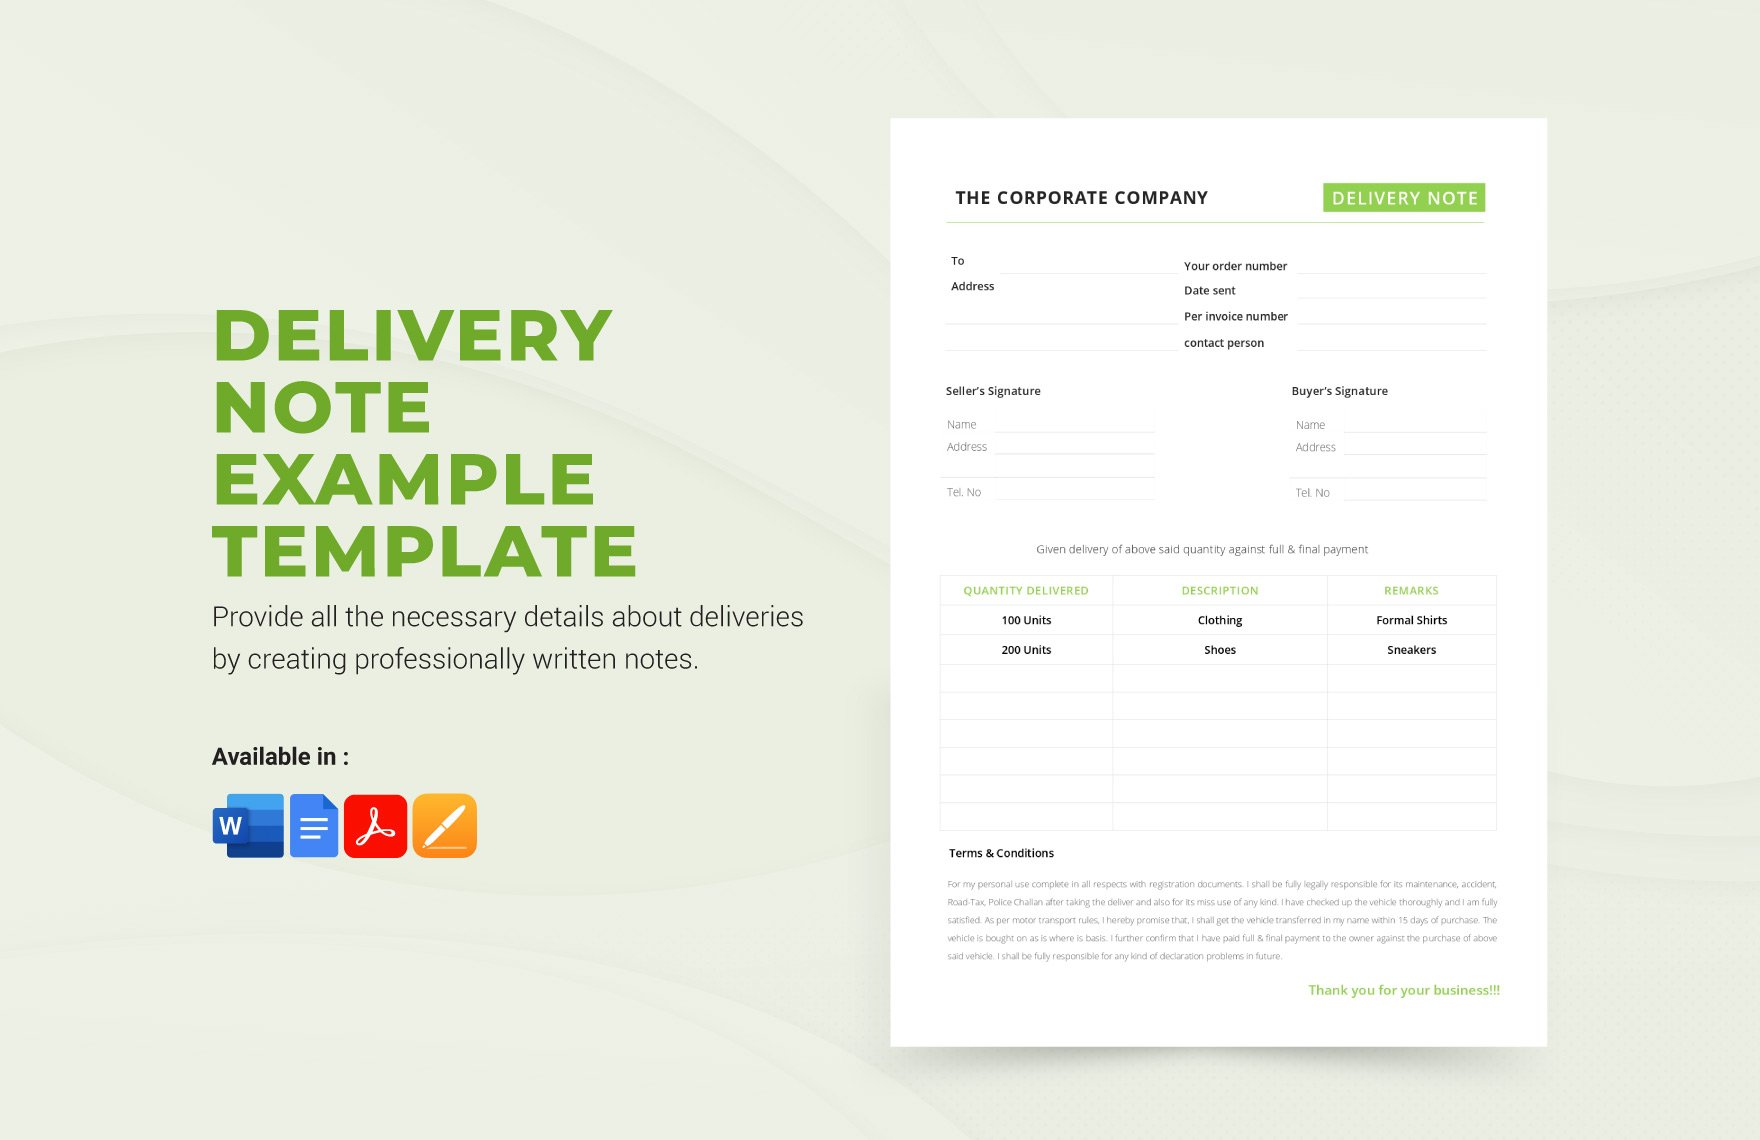 Delivery Note Example Template in Word, Google Docs, PDF, Apple Pages